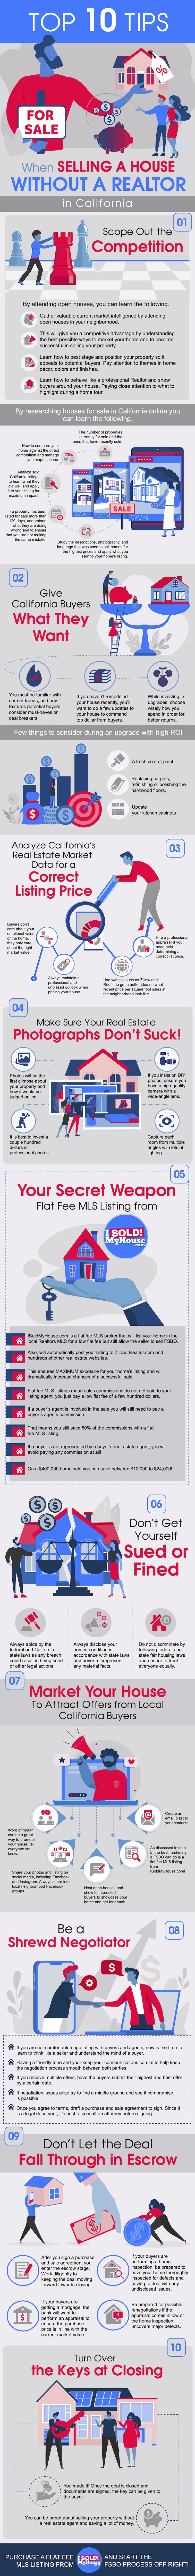 infographic of the 10 steps to sell a house in california without an agent